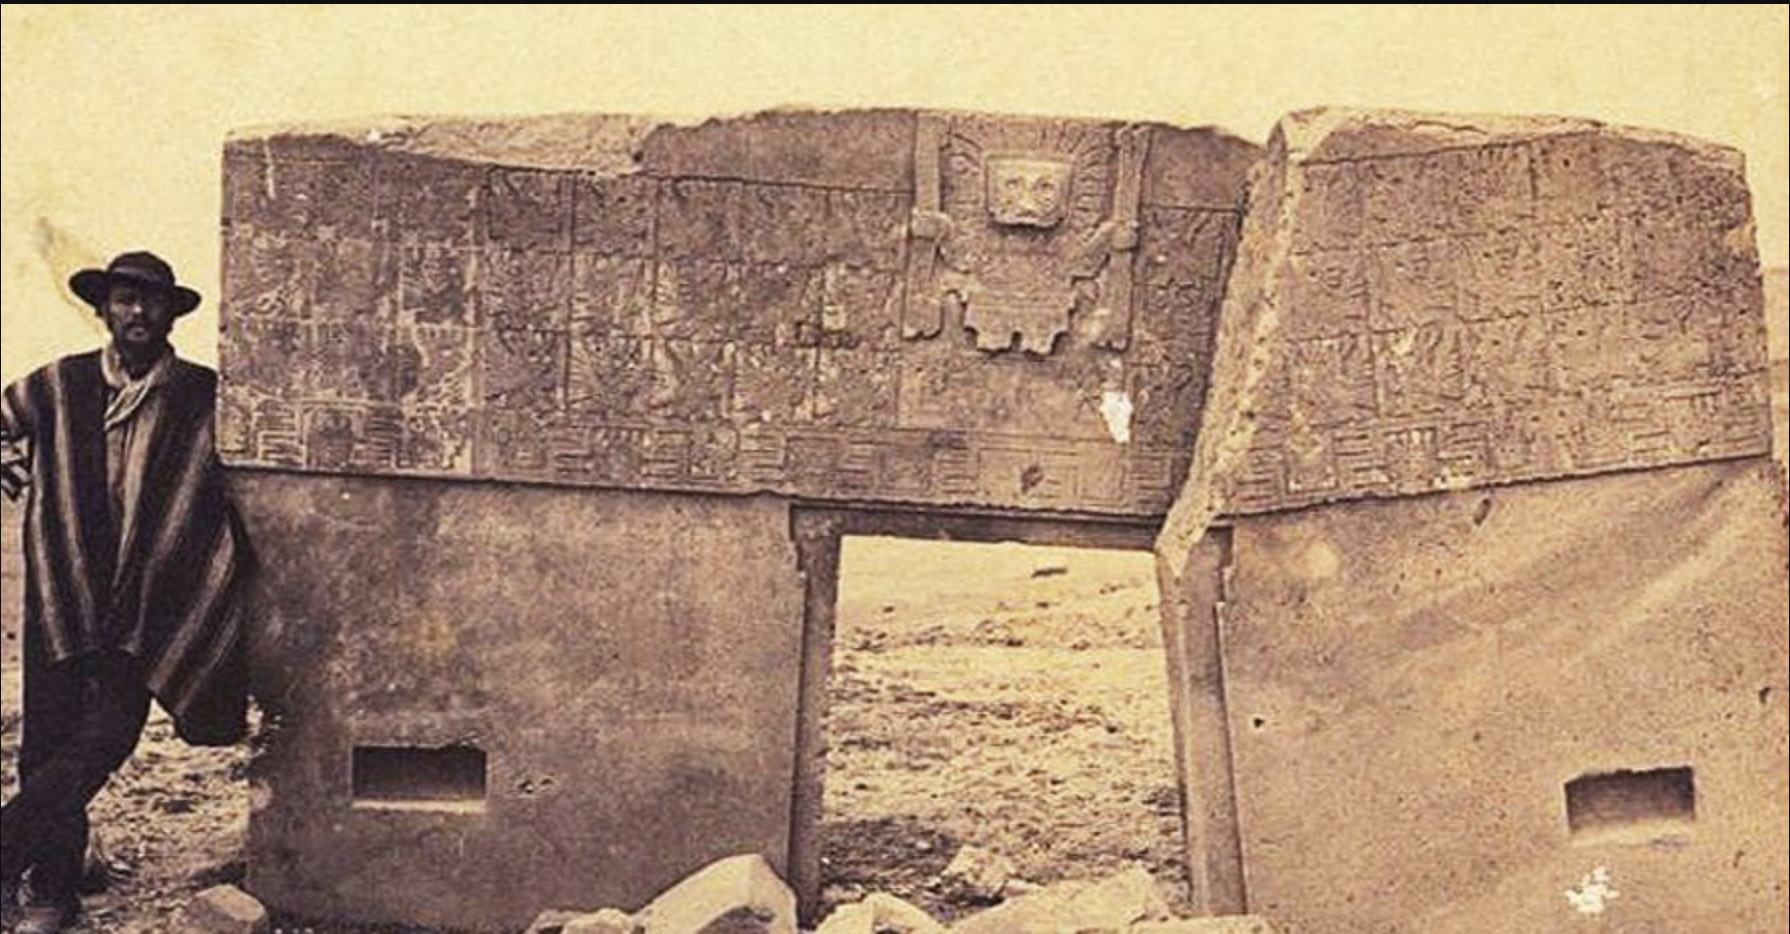 A vintage photo of the Gate of the Sun.